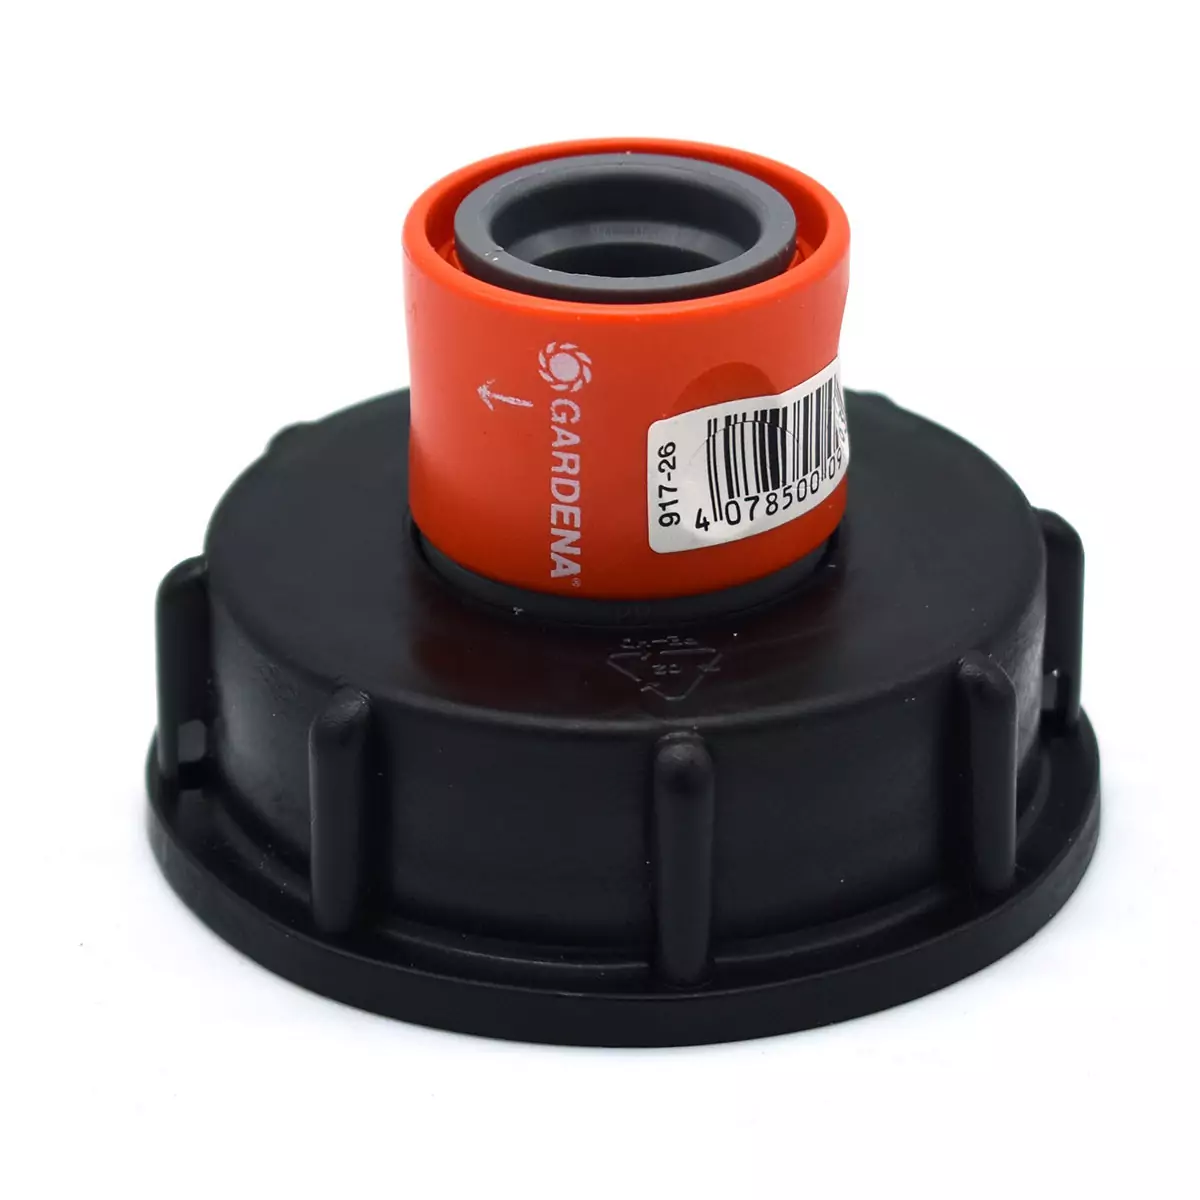 S60x6 connection - Gardena rapid coupling female outlet